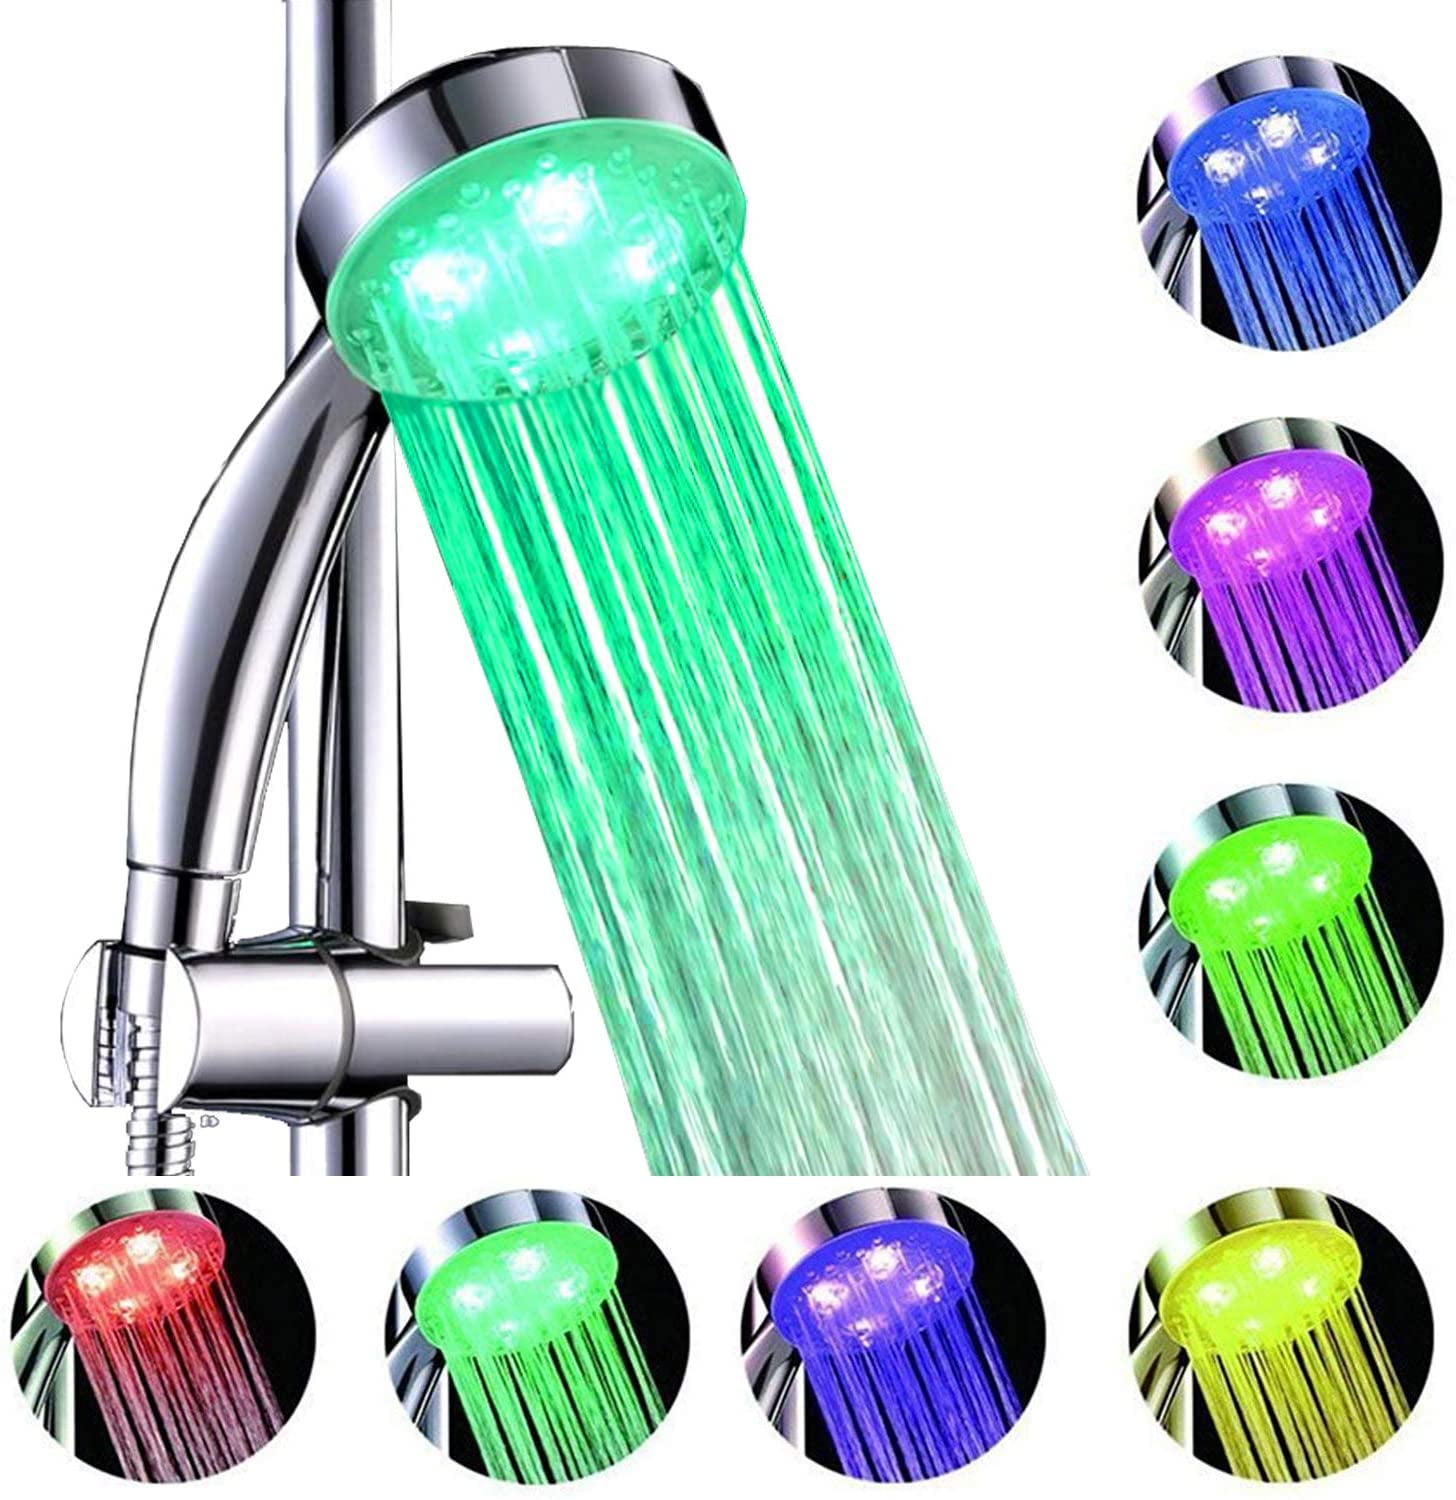 Handheld 7 Color Changing LED Light Water Bath Home Bathroom Shower Head Glow 